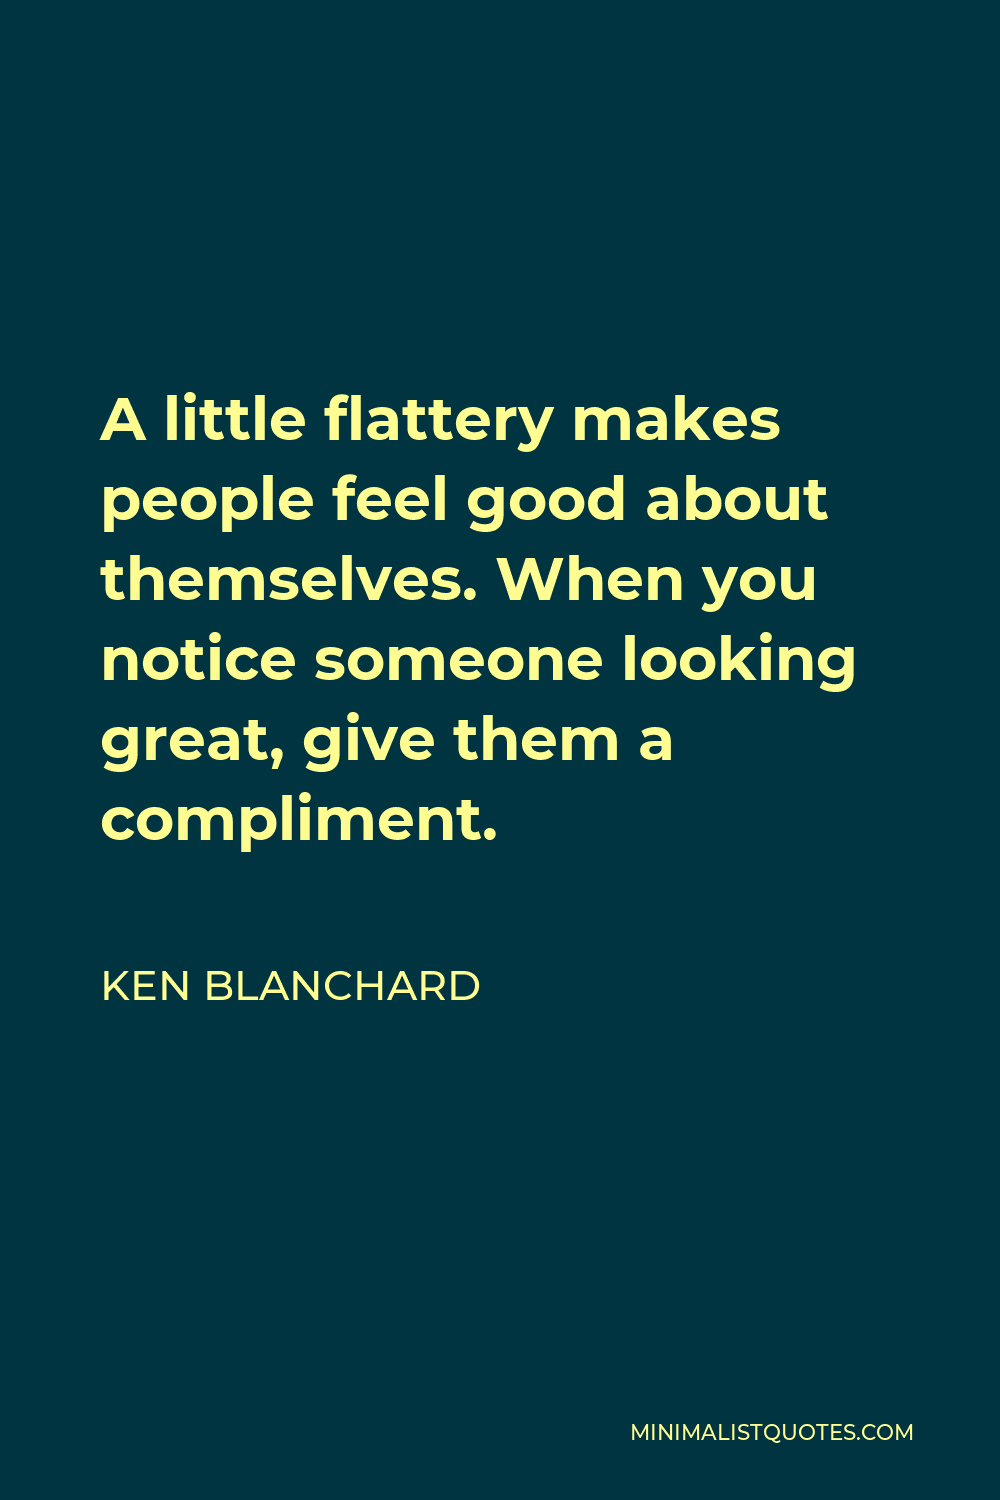 Ken Blanchard Quote - A little flattery makes people feel good about themselves. When you notice someone looking great, give them a compliment.